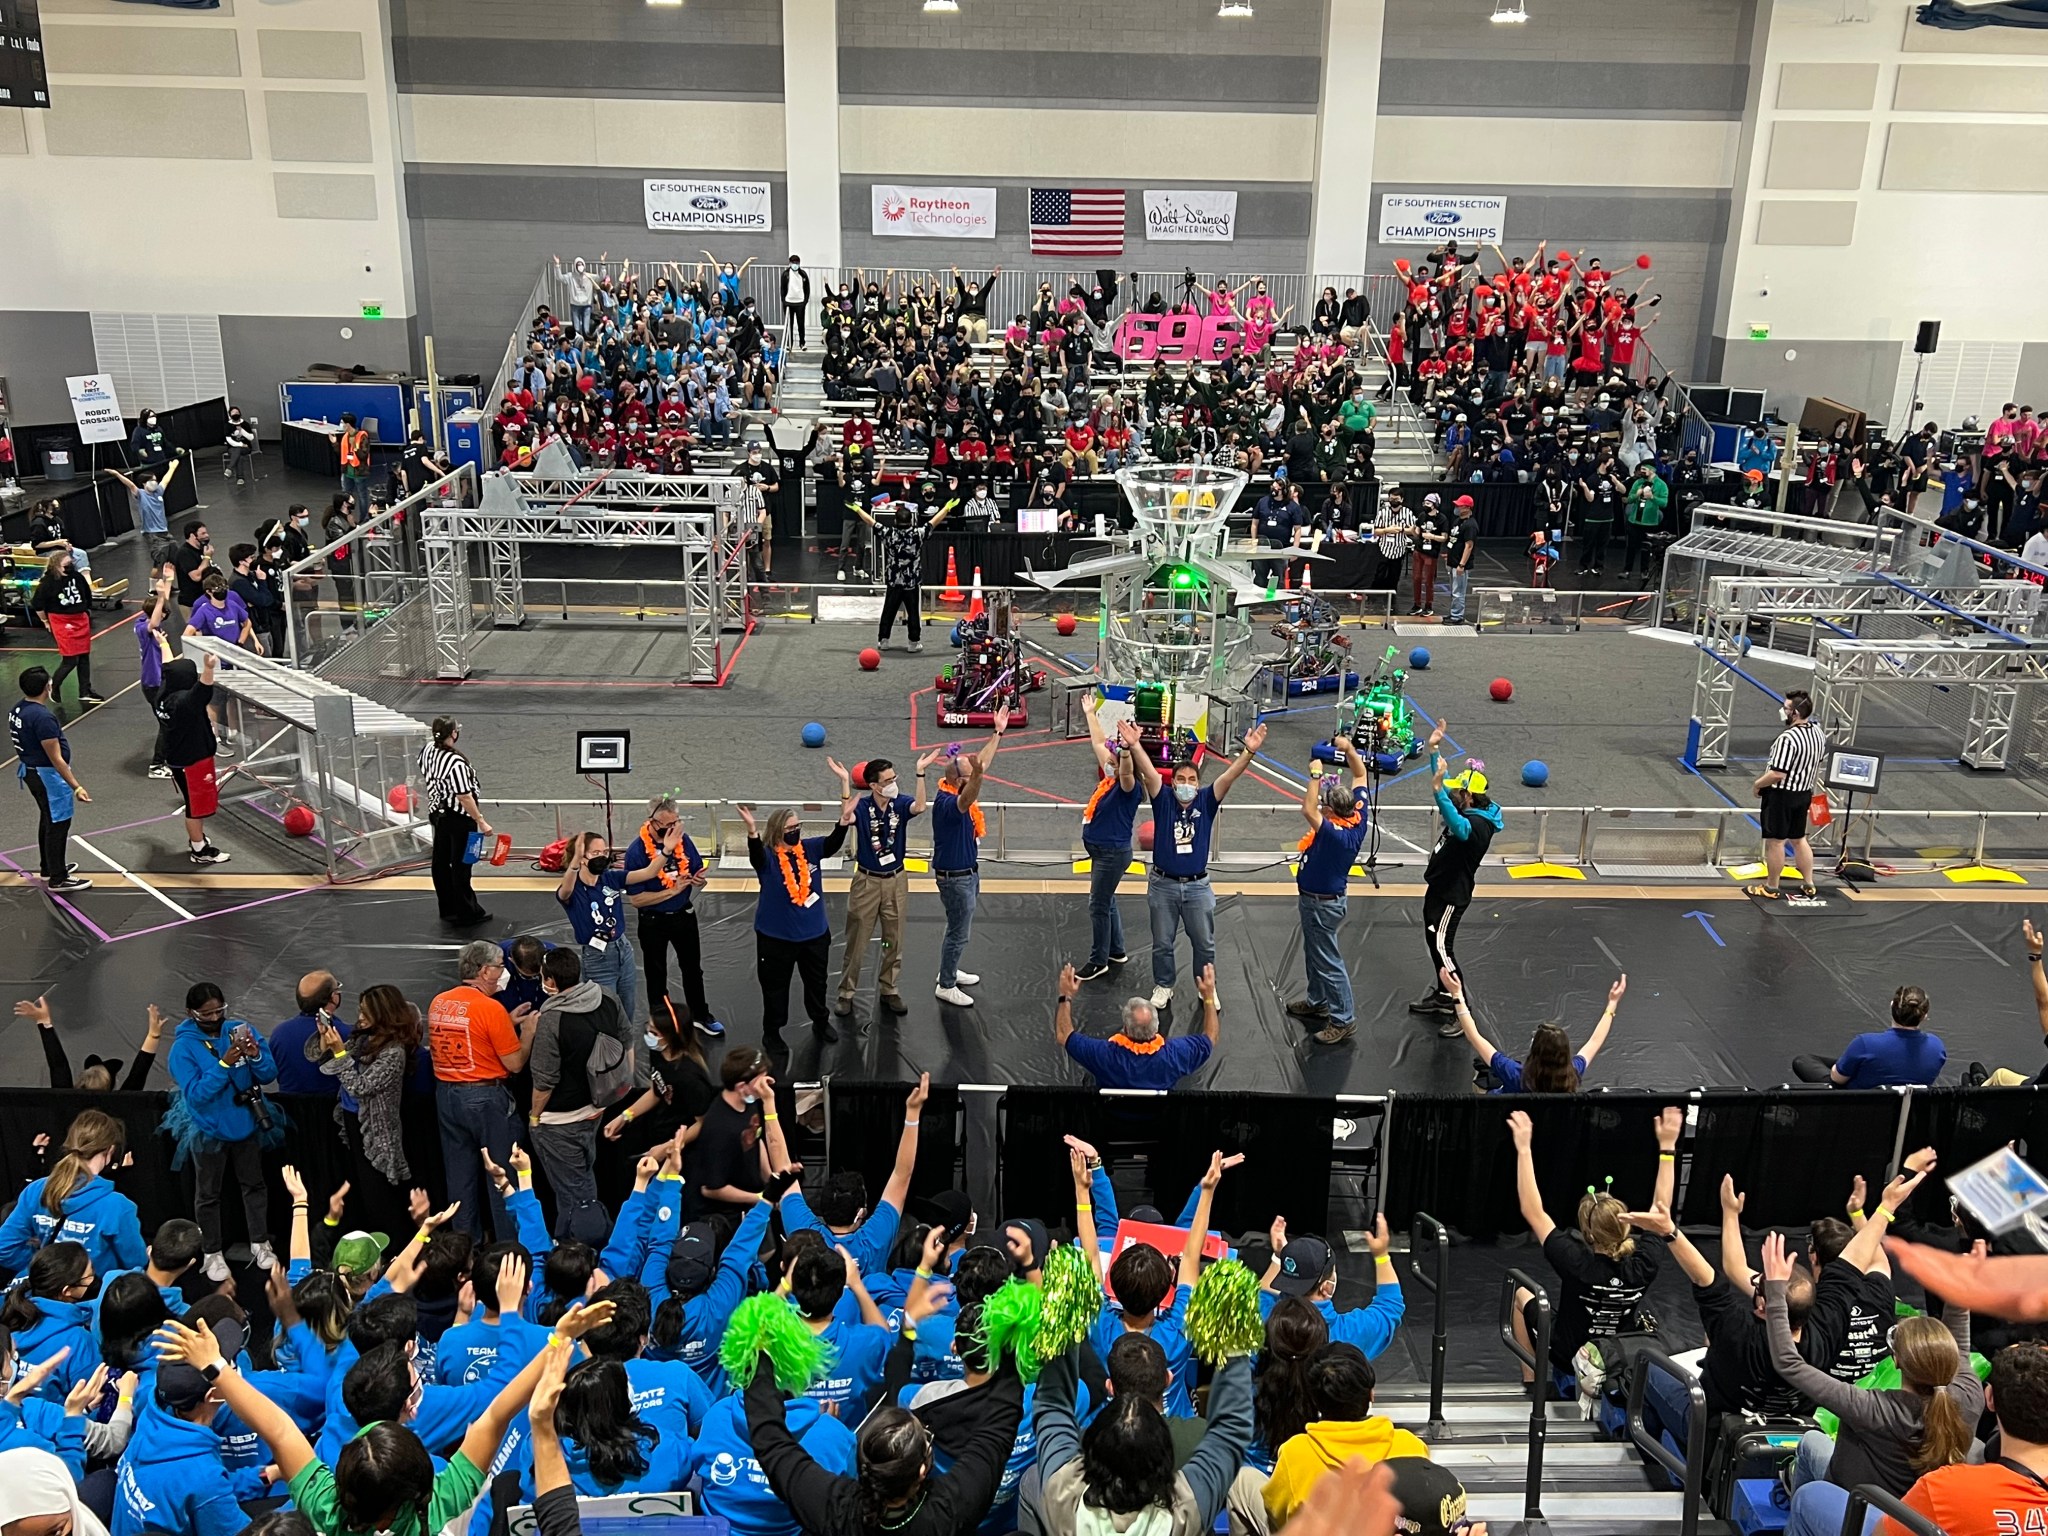 Judges, seen in navy blue at the edge of the playing field, lead students teams in a singalong of the Village People’s “YMCA” before the final playoff rounds at the 2022 Los Angeles Regional FIRST Robotics Competition.